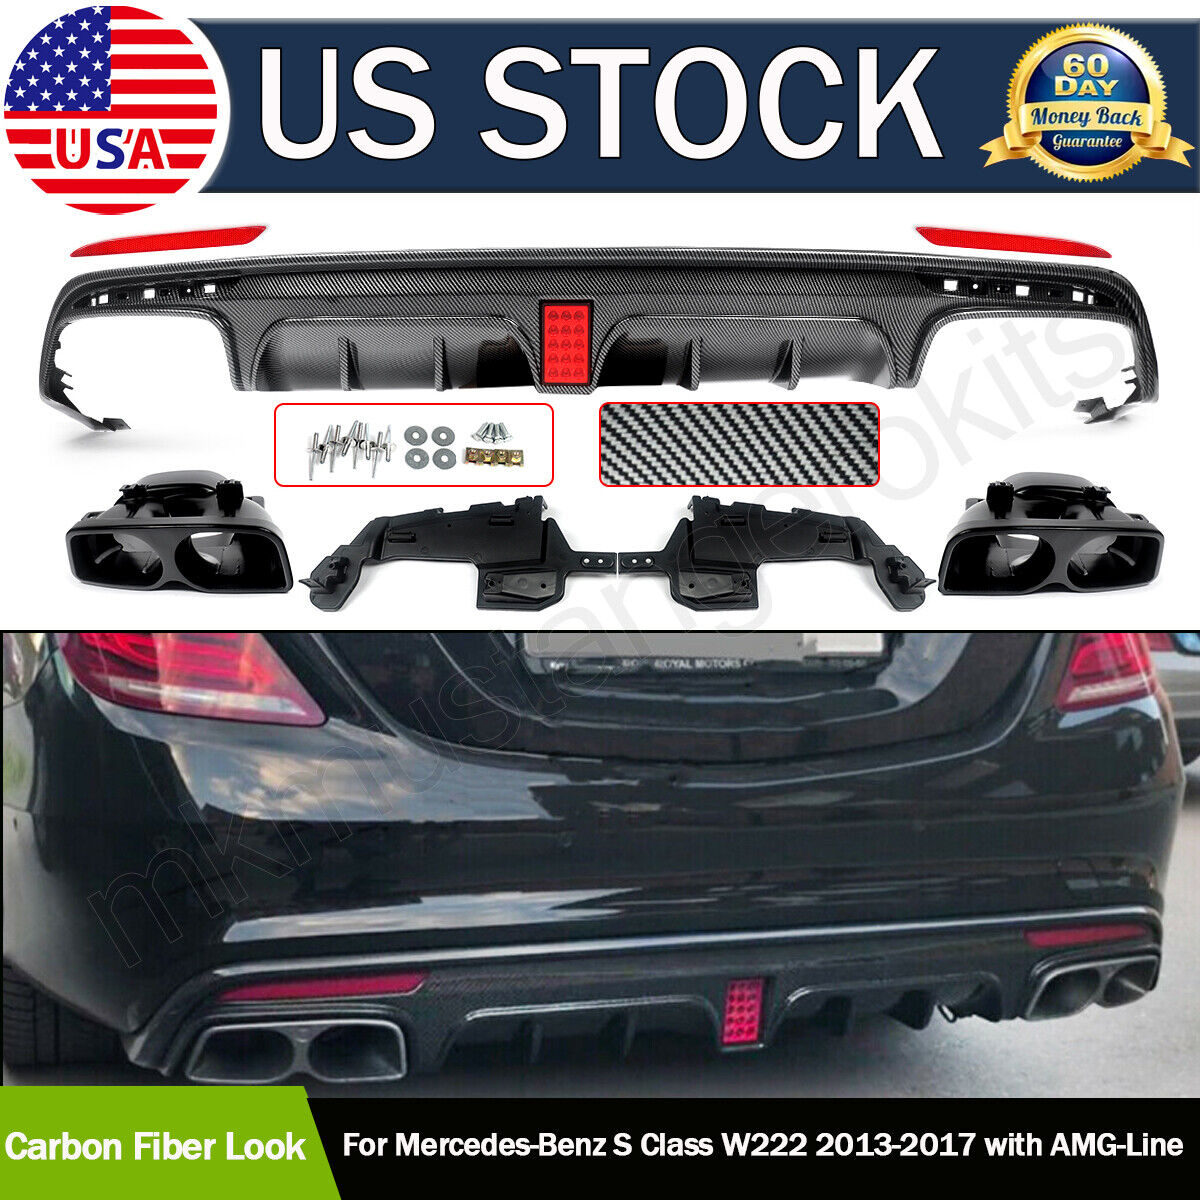 F1 Style Carbon Look Rear Diffuser W/Exhaust For Mercedes S Class W222 2013-2017